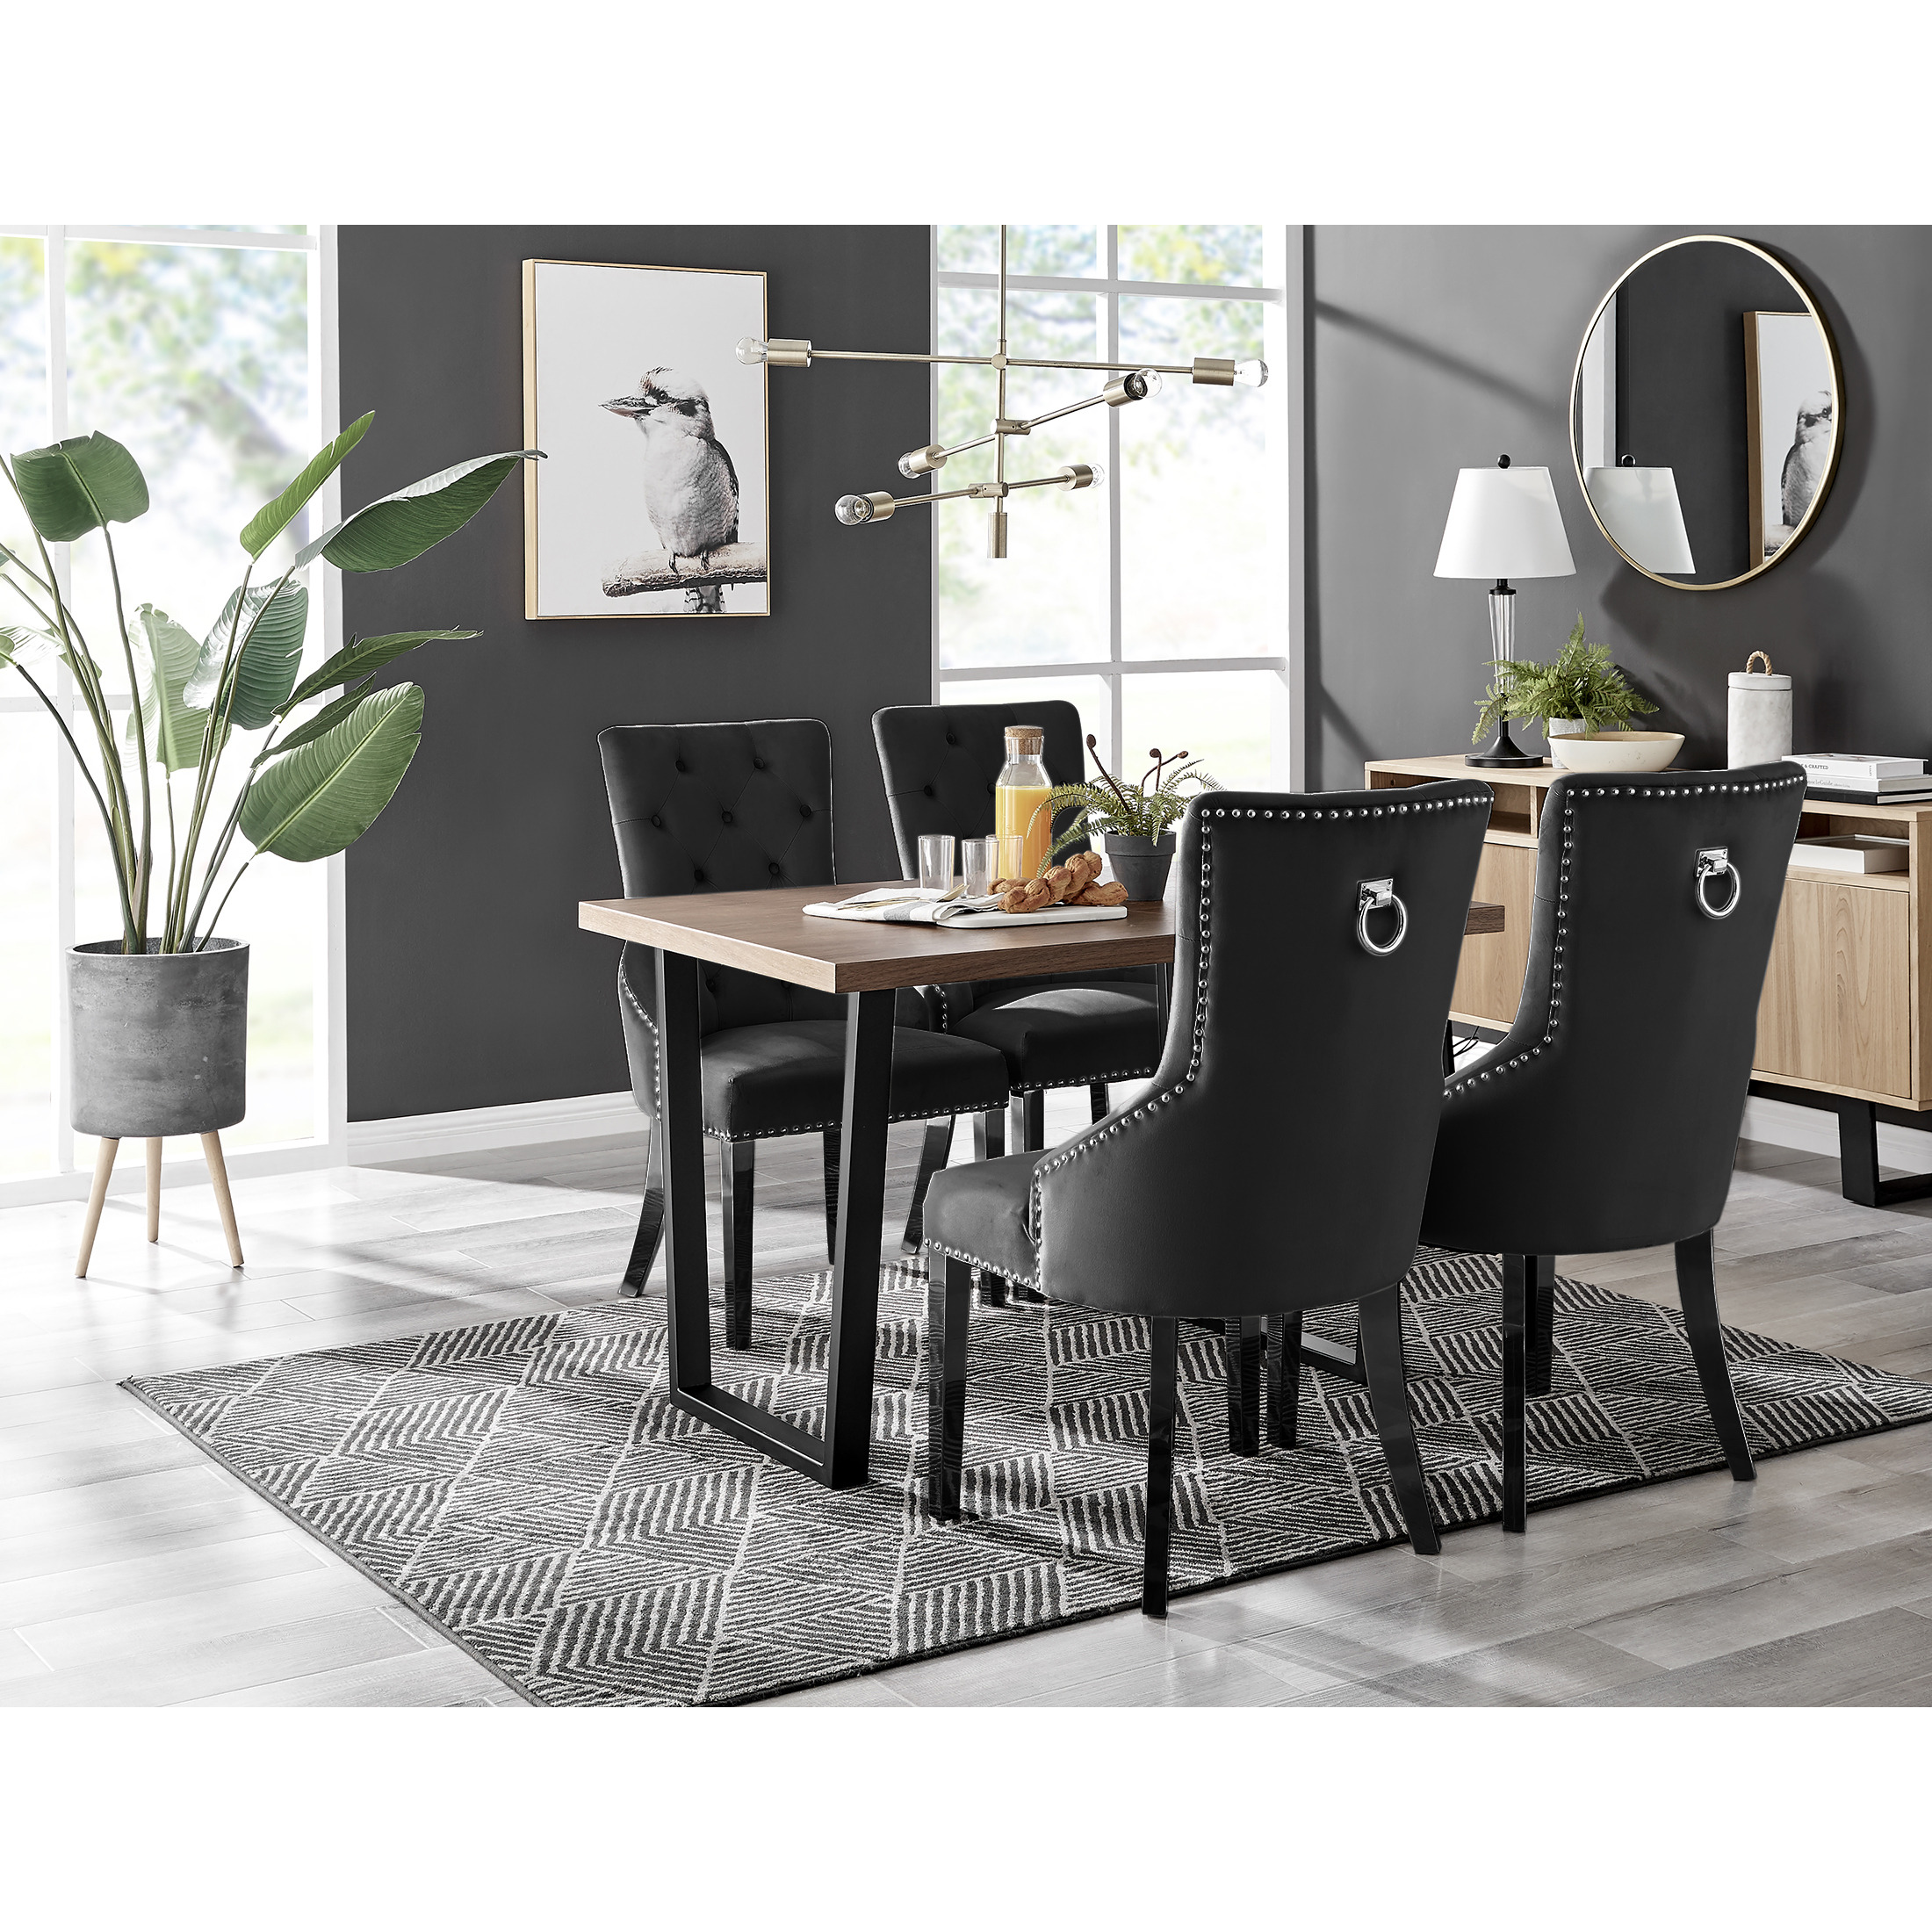 Kylo Brown Wood Effect Dining Table & 4 Belgravia Black Leg Chairs